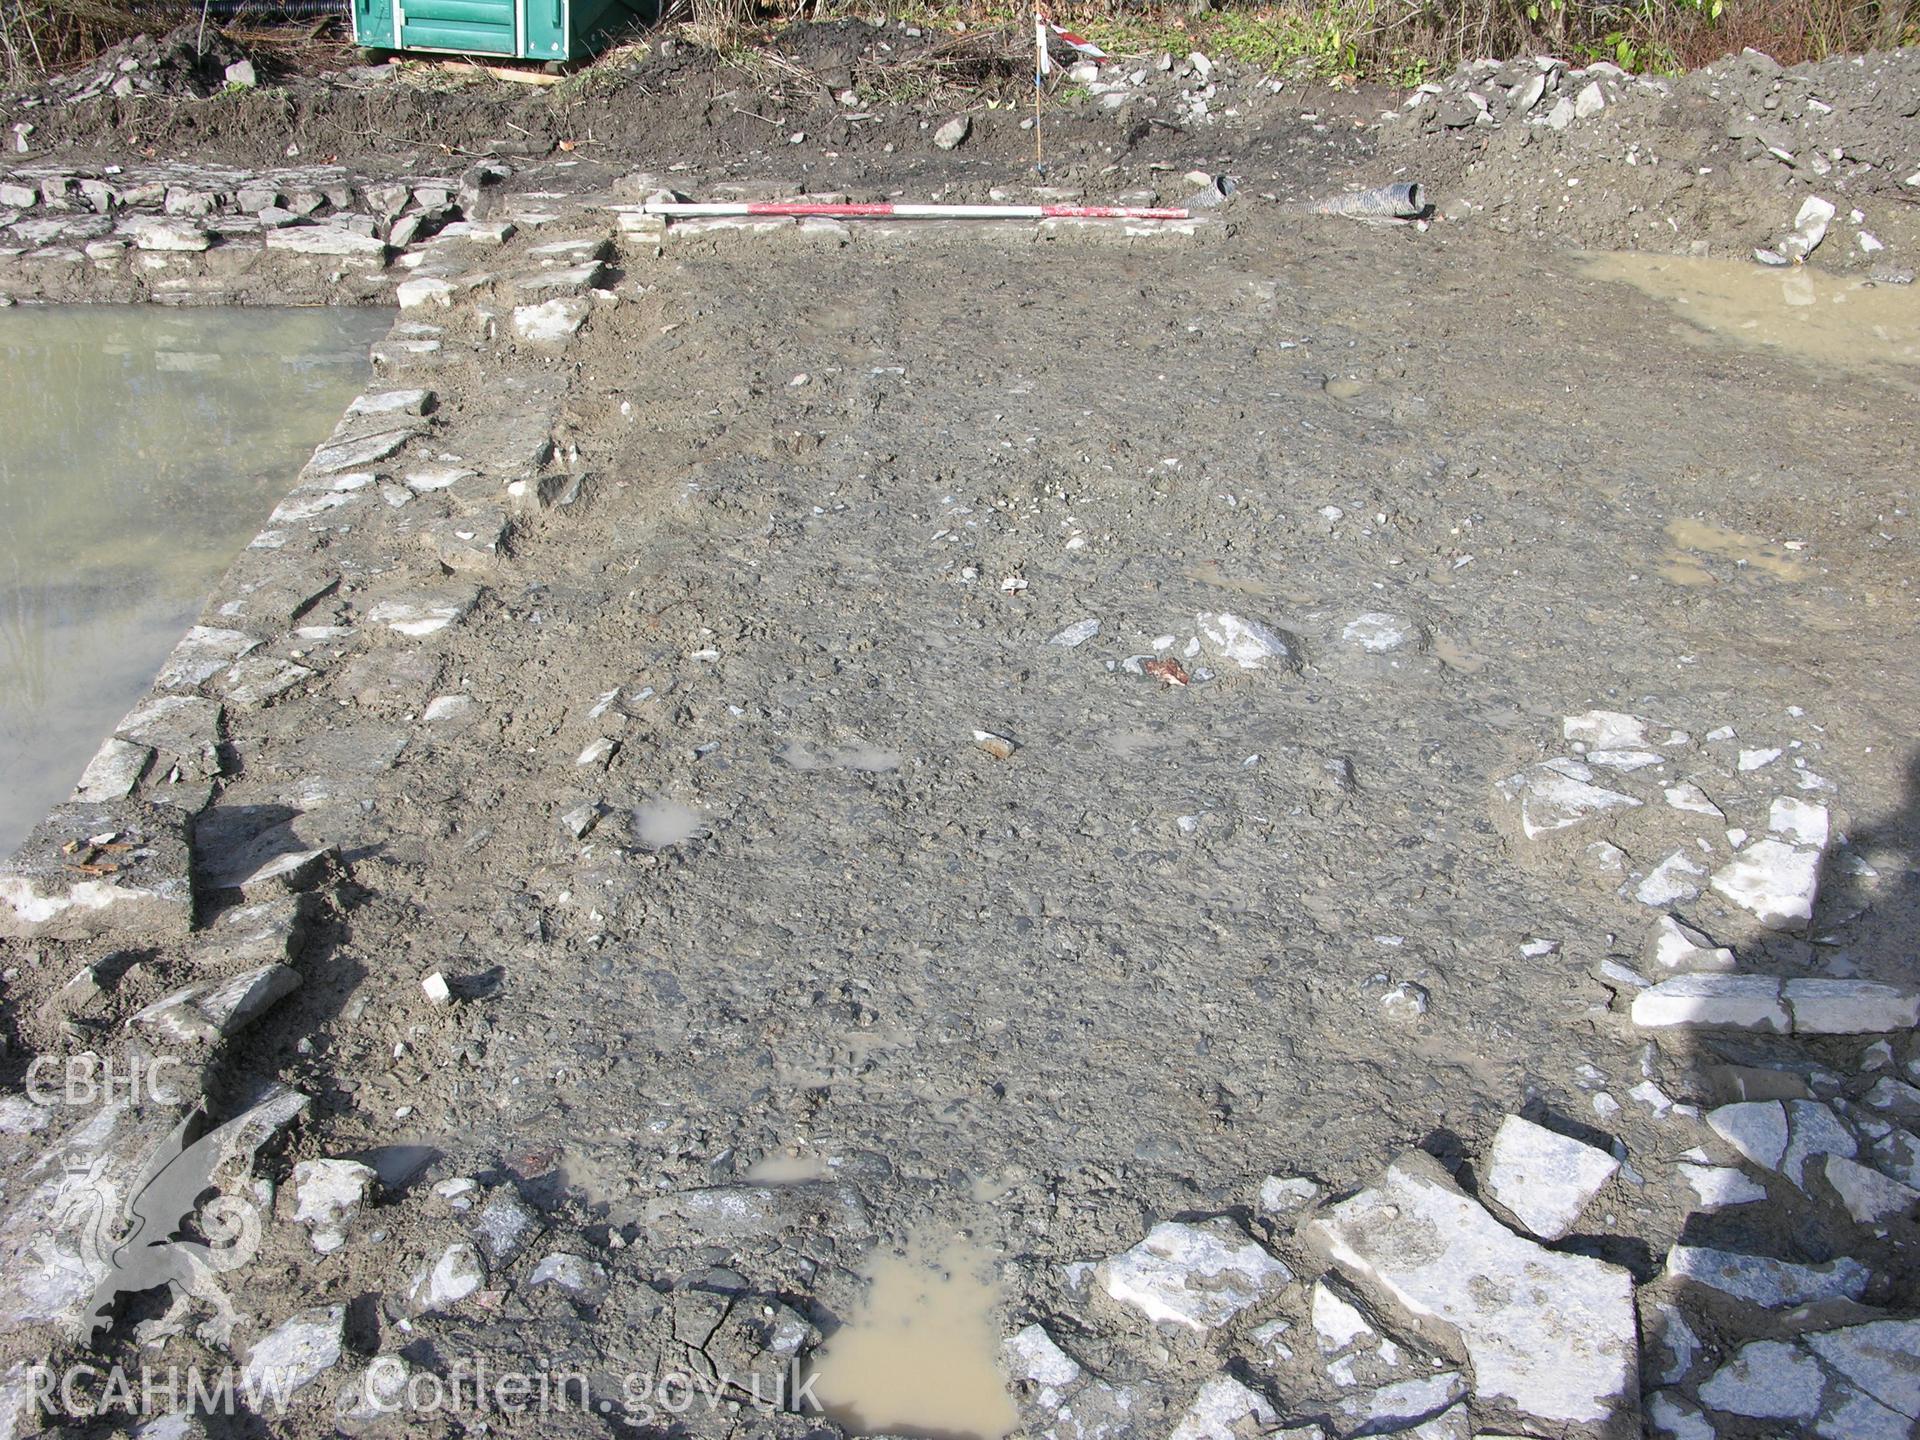 Colour digital photograph showing view of partially cobbled/partially rammed floor - part of the Archaeological Excavation report for Horse Yard Farm, Evenjobb (CAP Report 607) by Chris E Smith, from a Cambrian Archaeological Projects assessment survey.